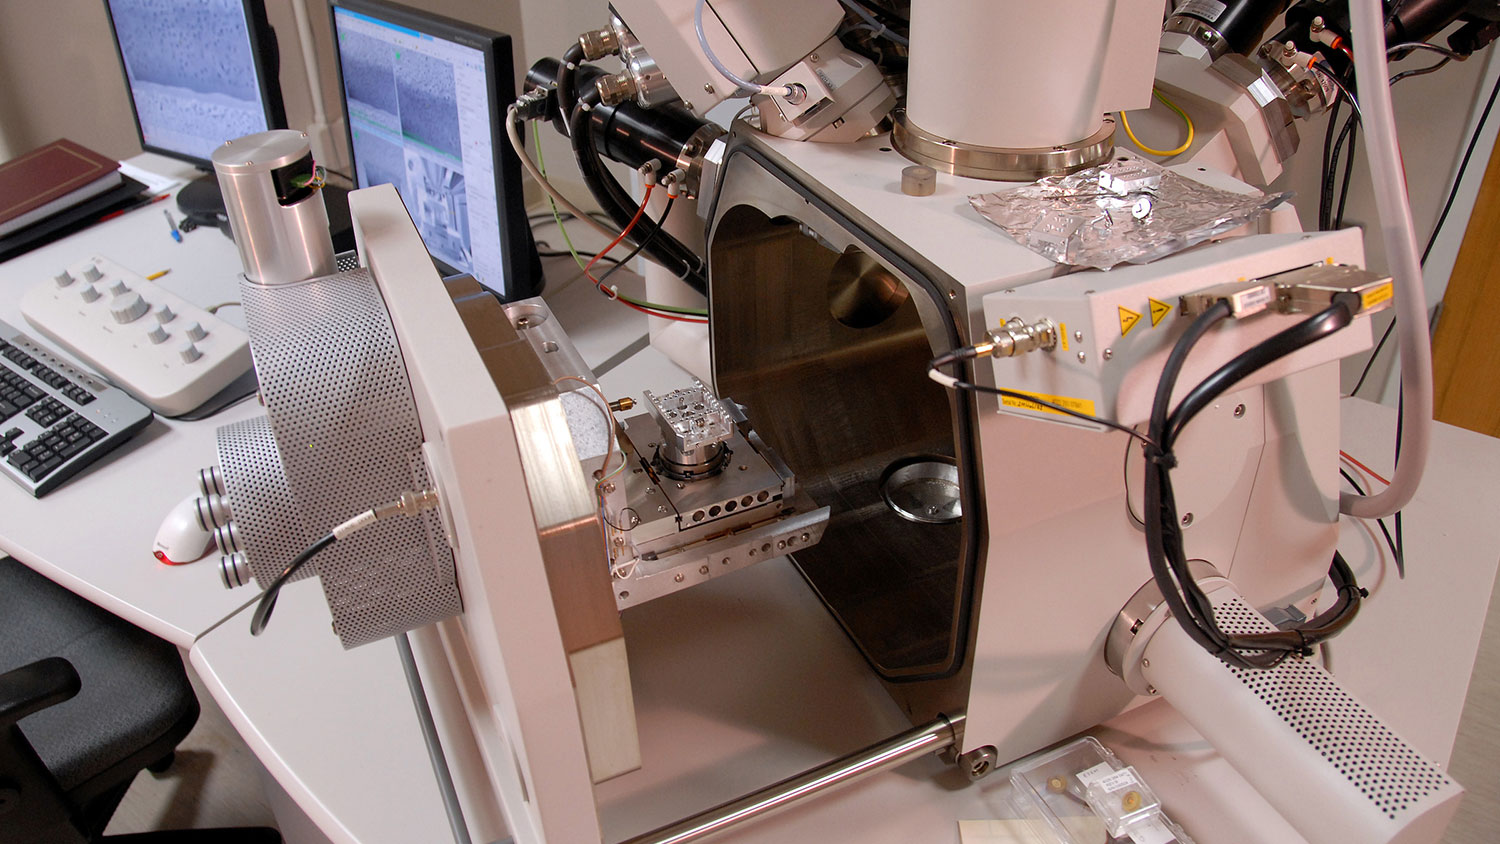 FEI Quanta 3D Dual Beam instrument in the Advanced Instrumentation Facility in Monteith Research building.